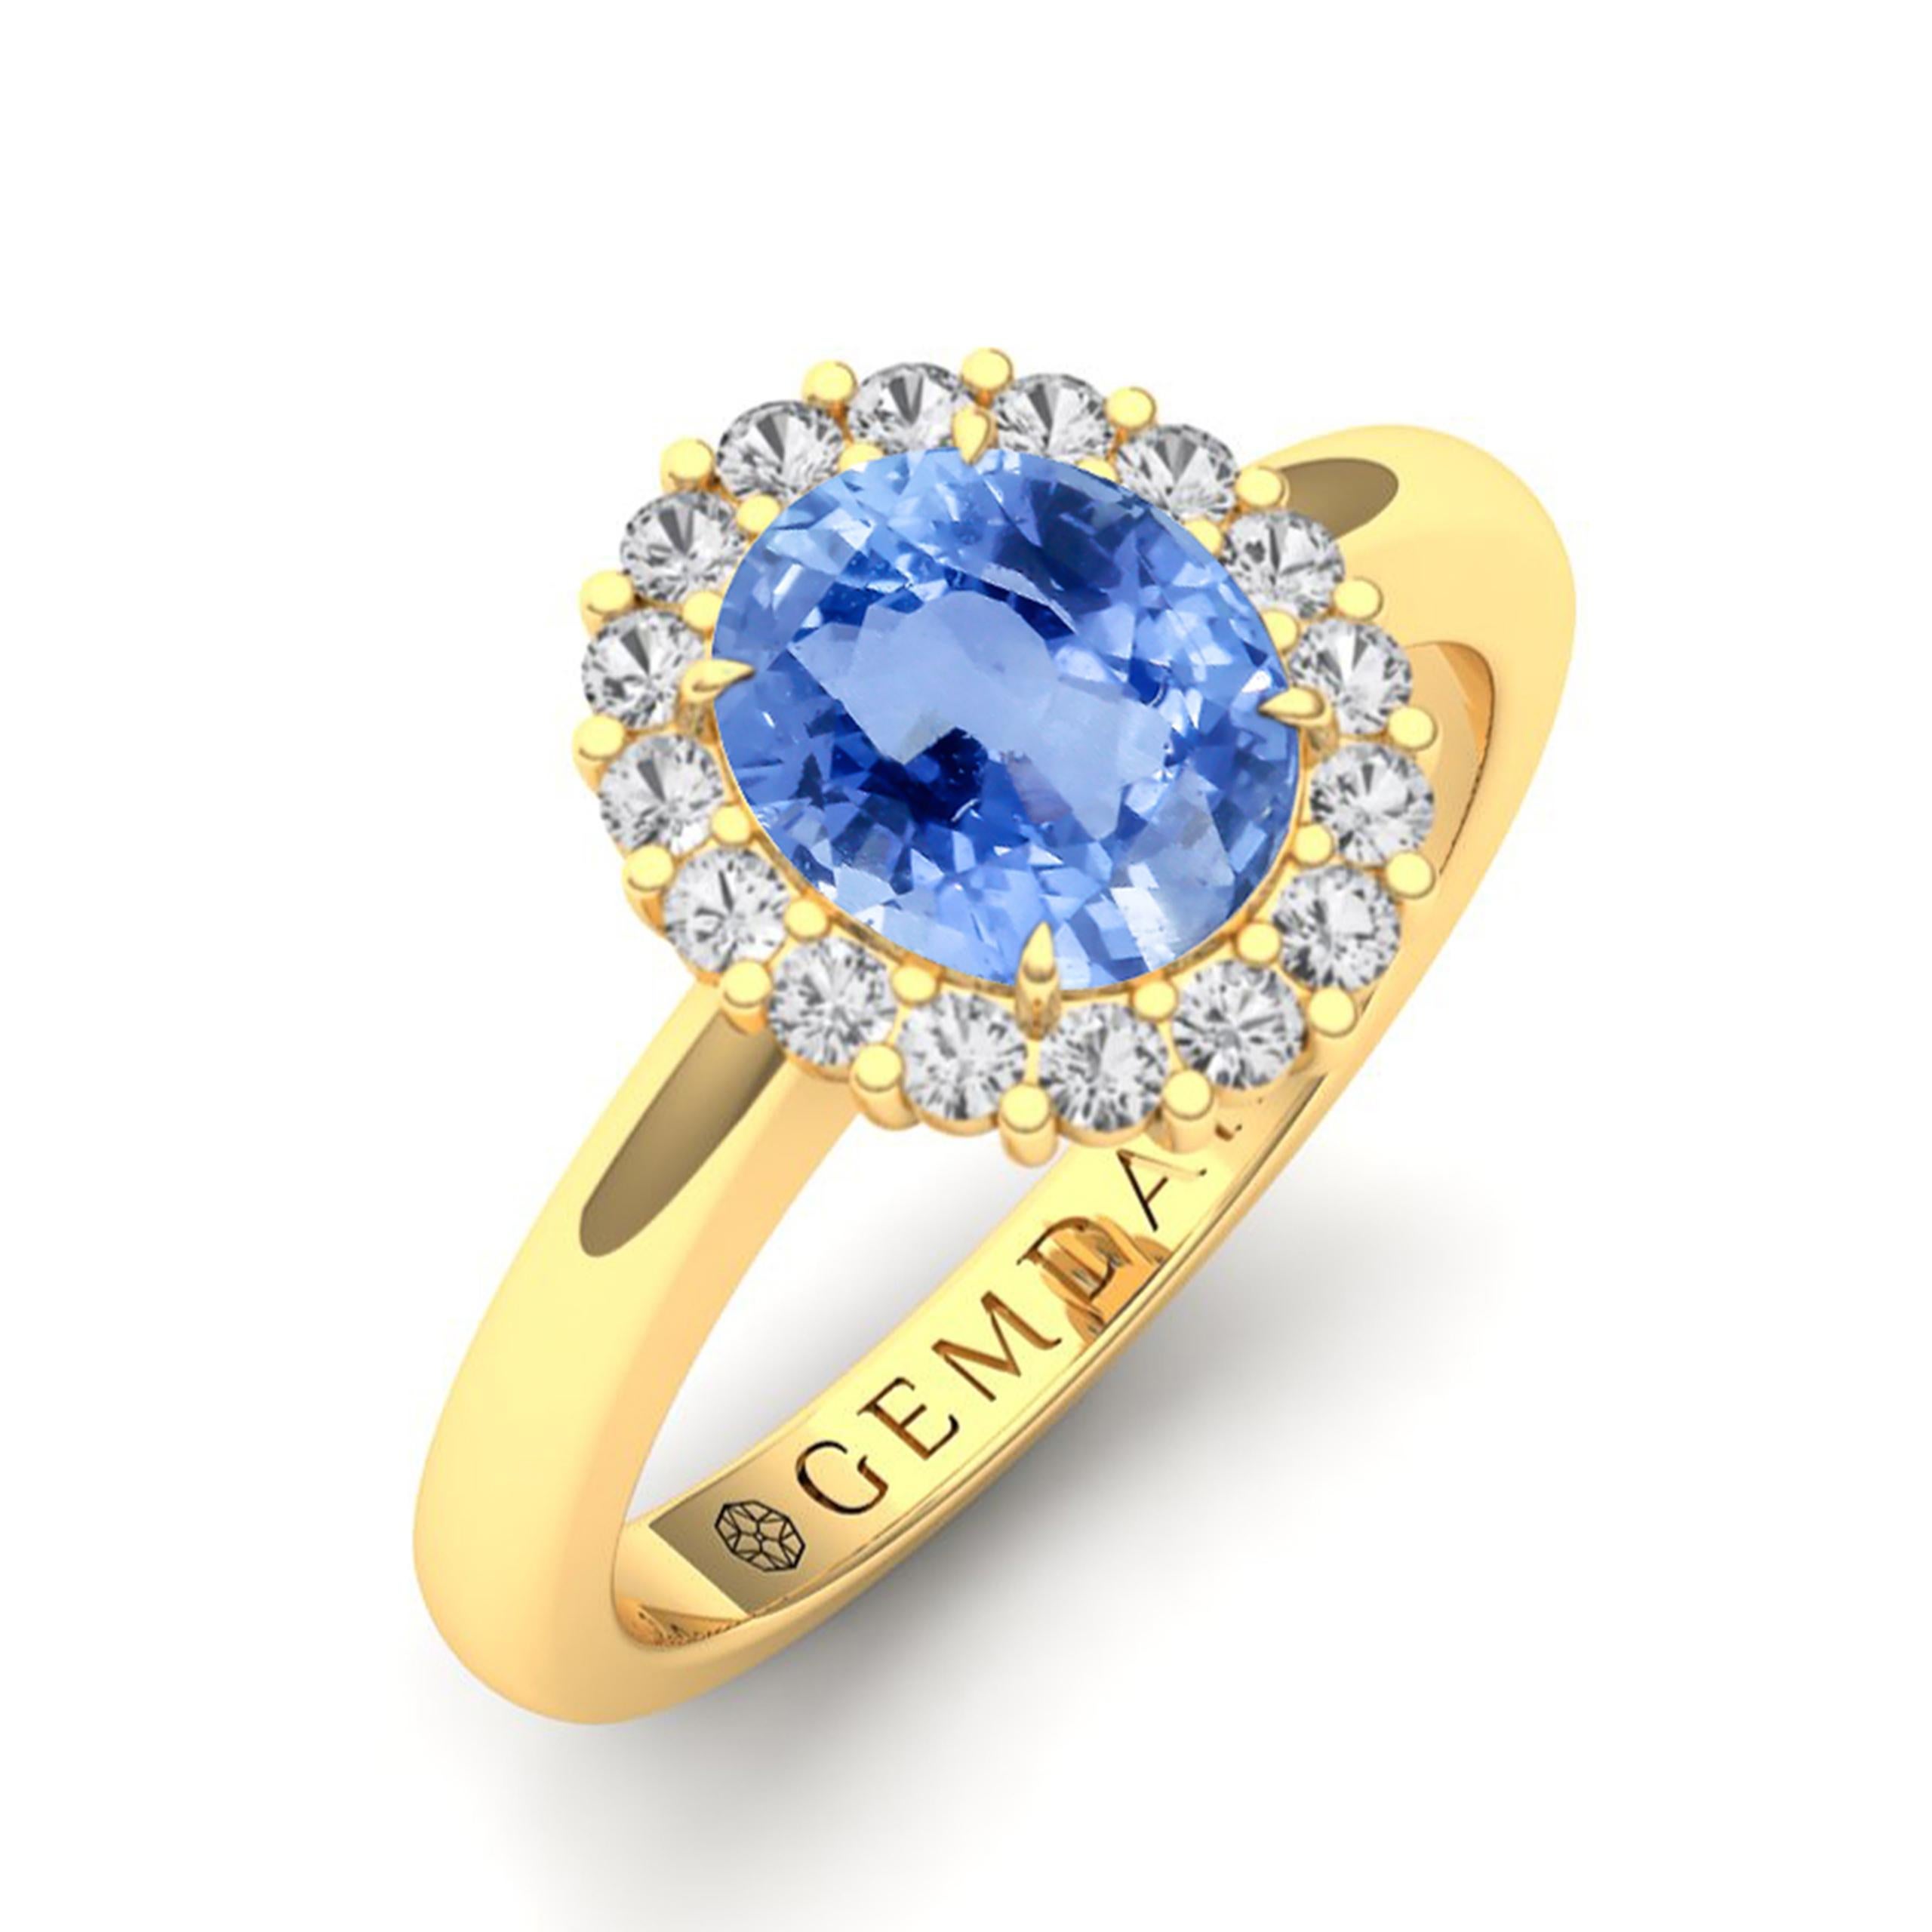 Dazzle in sophistication with our custom-made ring, featuring a 2.12-carat natural untreated Ceylon Blue Sapphire. The lively pastel blue hue is accentuated by conflict-free diamonds, all set in exquisite 18K gold. Certified by Emteem Gem Labs, this